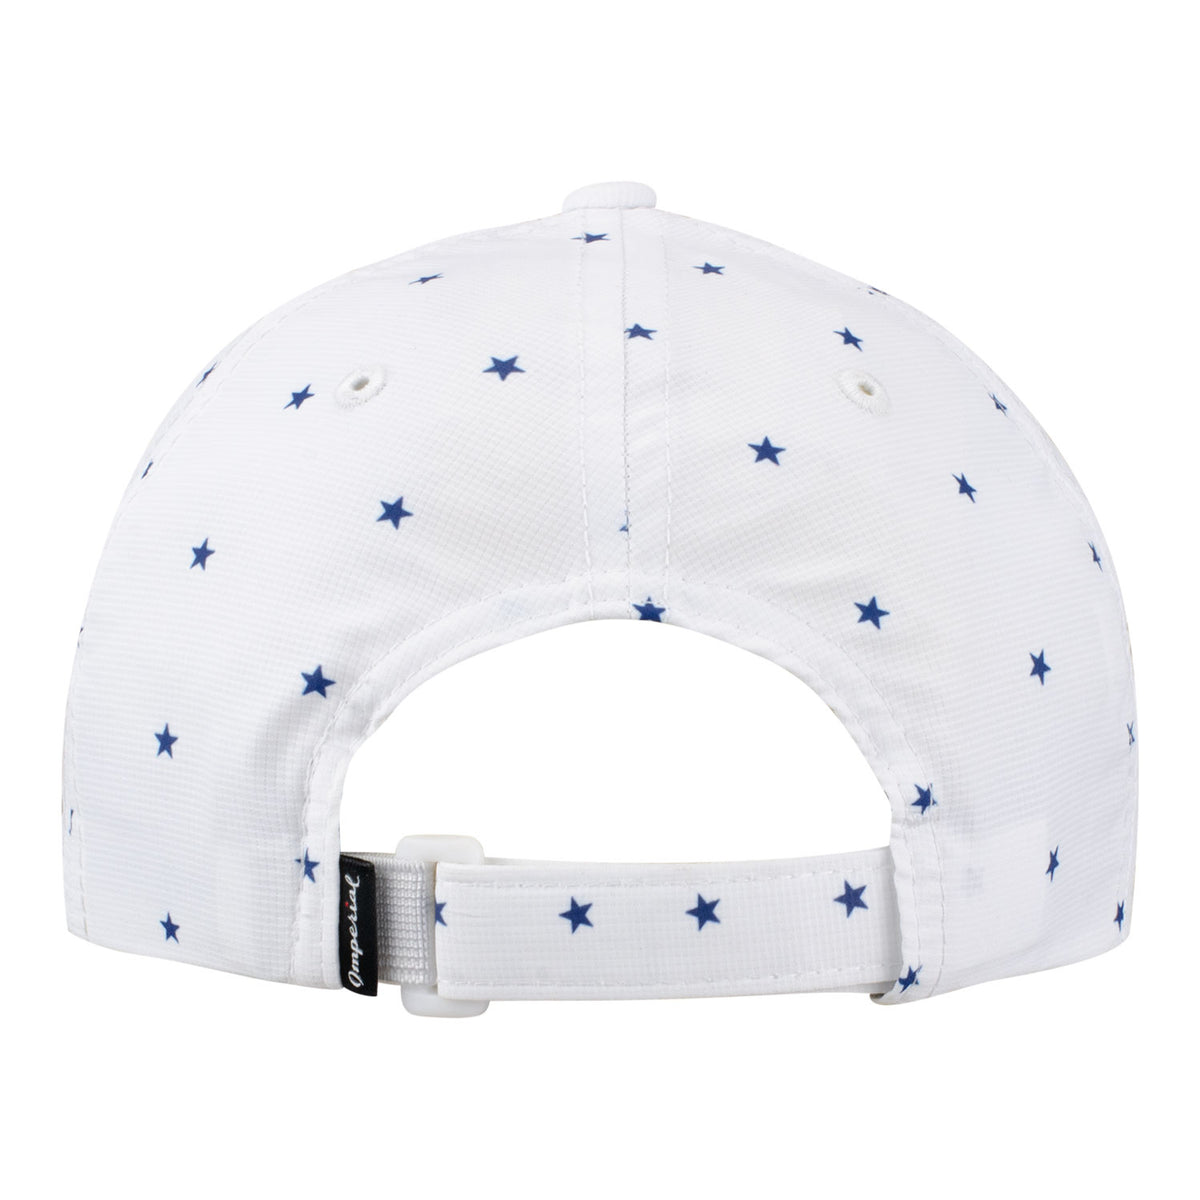 Imperial 2025 Ryder Cup Original Performance Hat in White Star Pattern - Back View